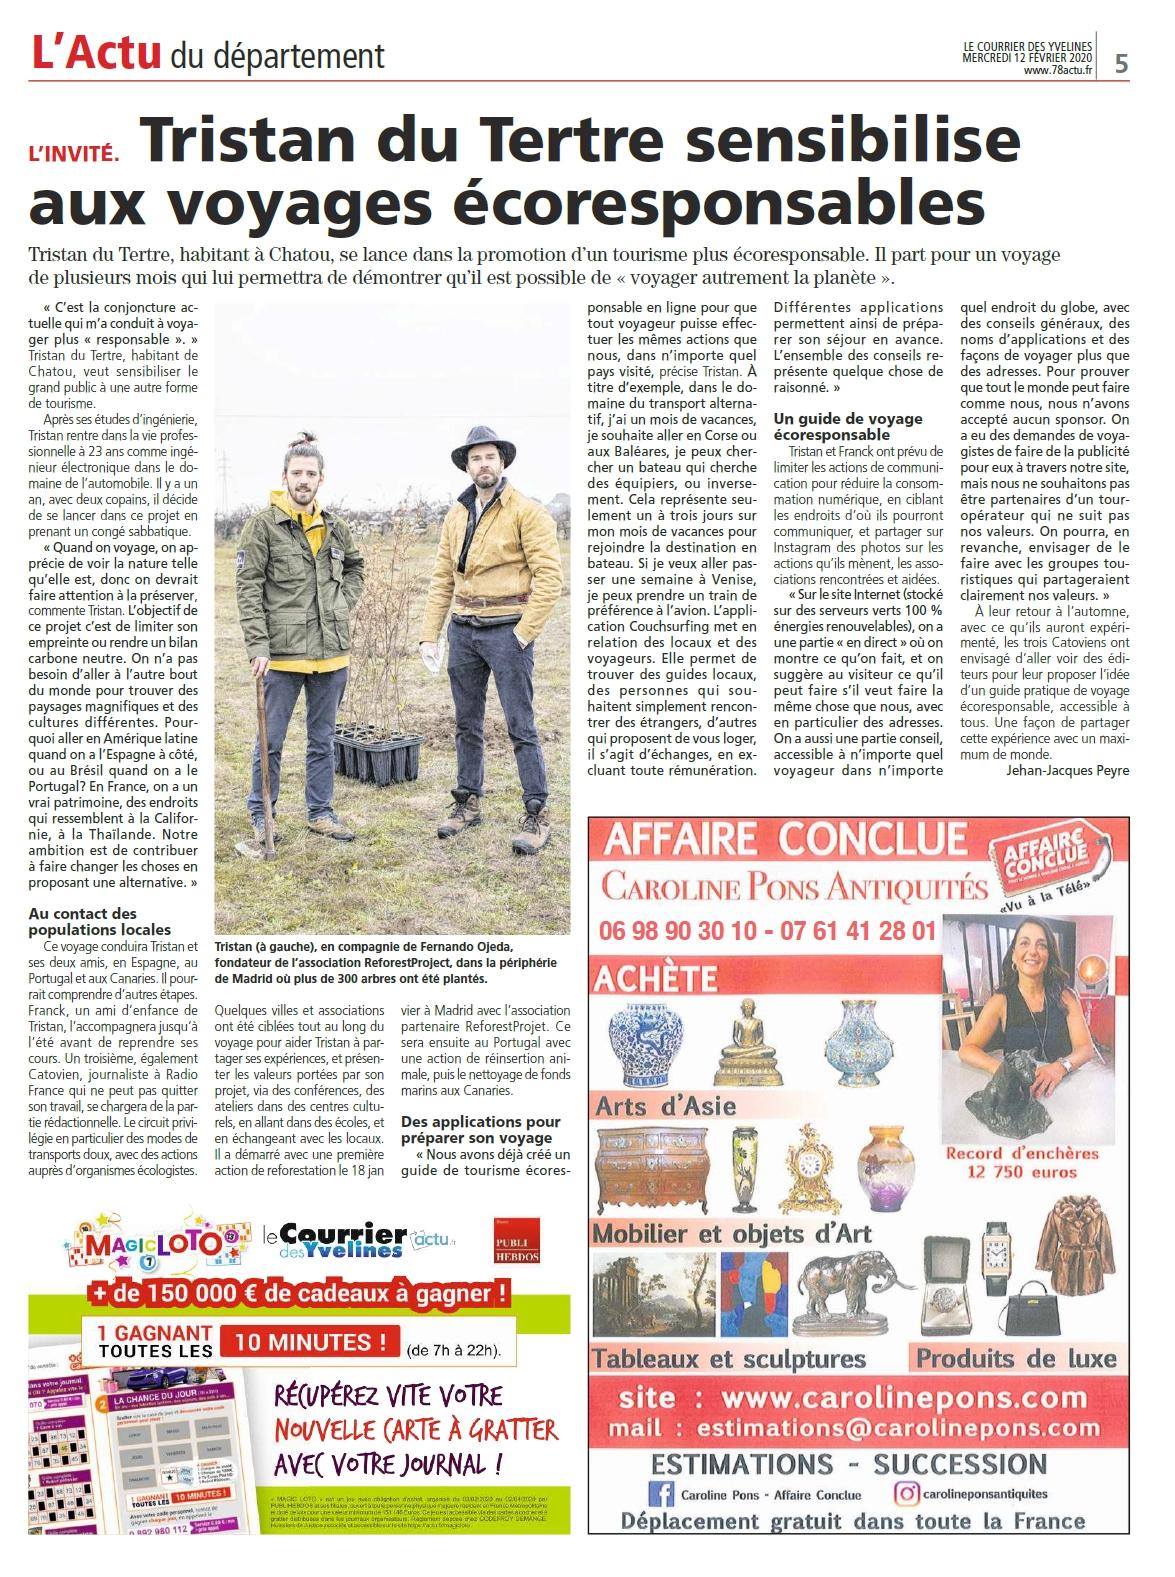 In the Courier des Yvelines